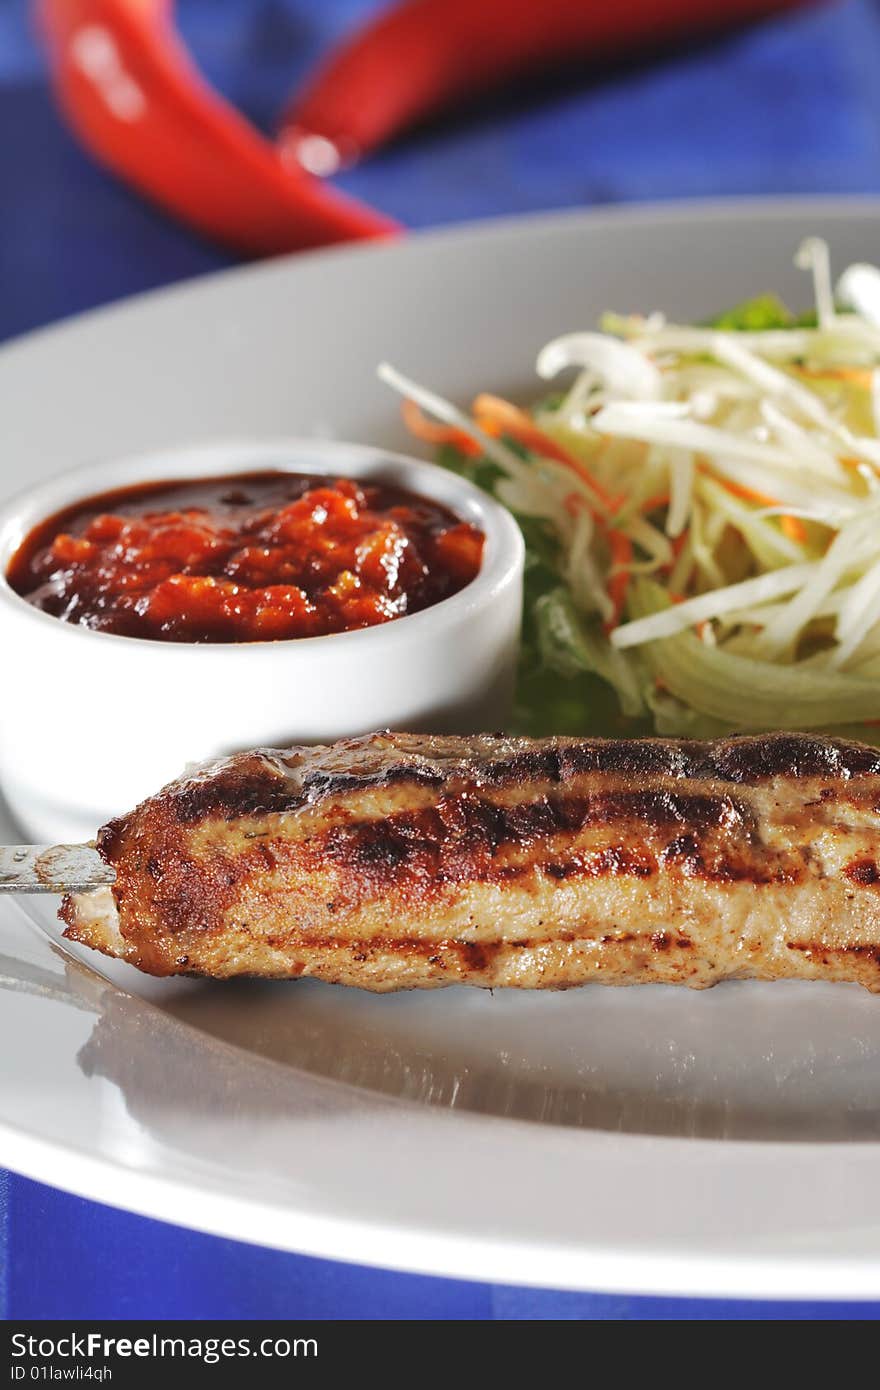 Hot Meat Dishes - Grilled Meat with Red Chile Sauce and Salad